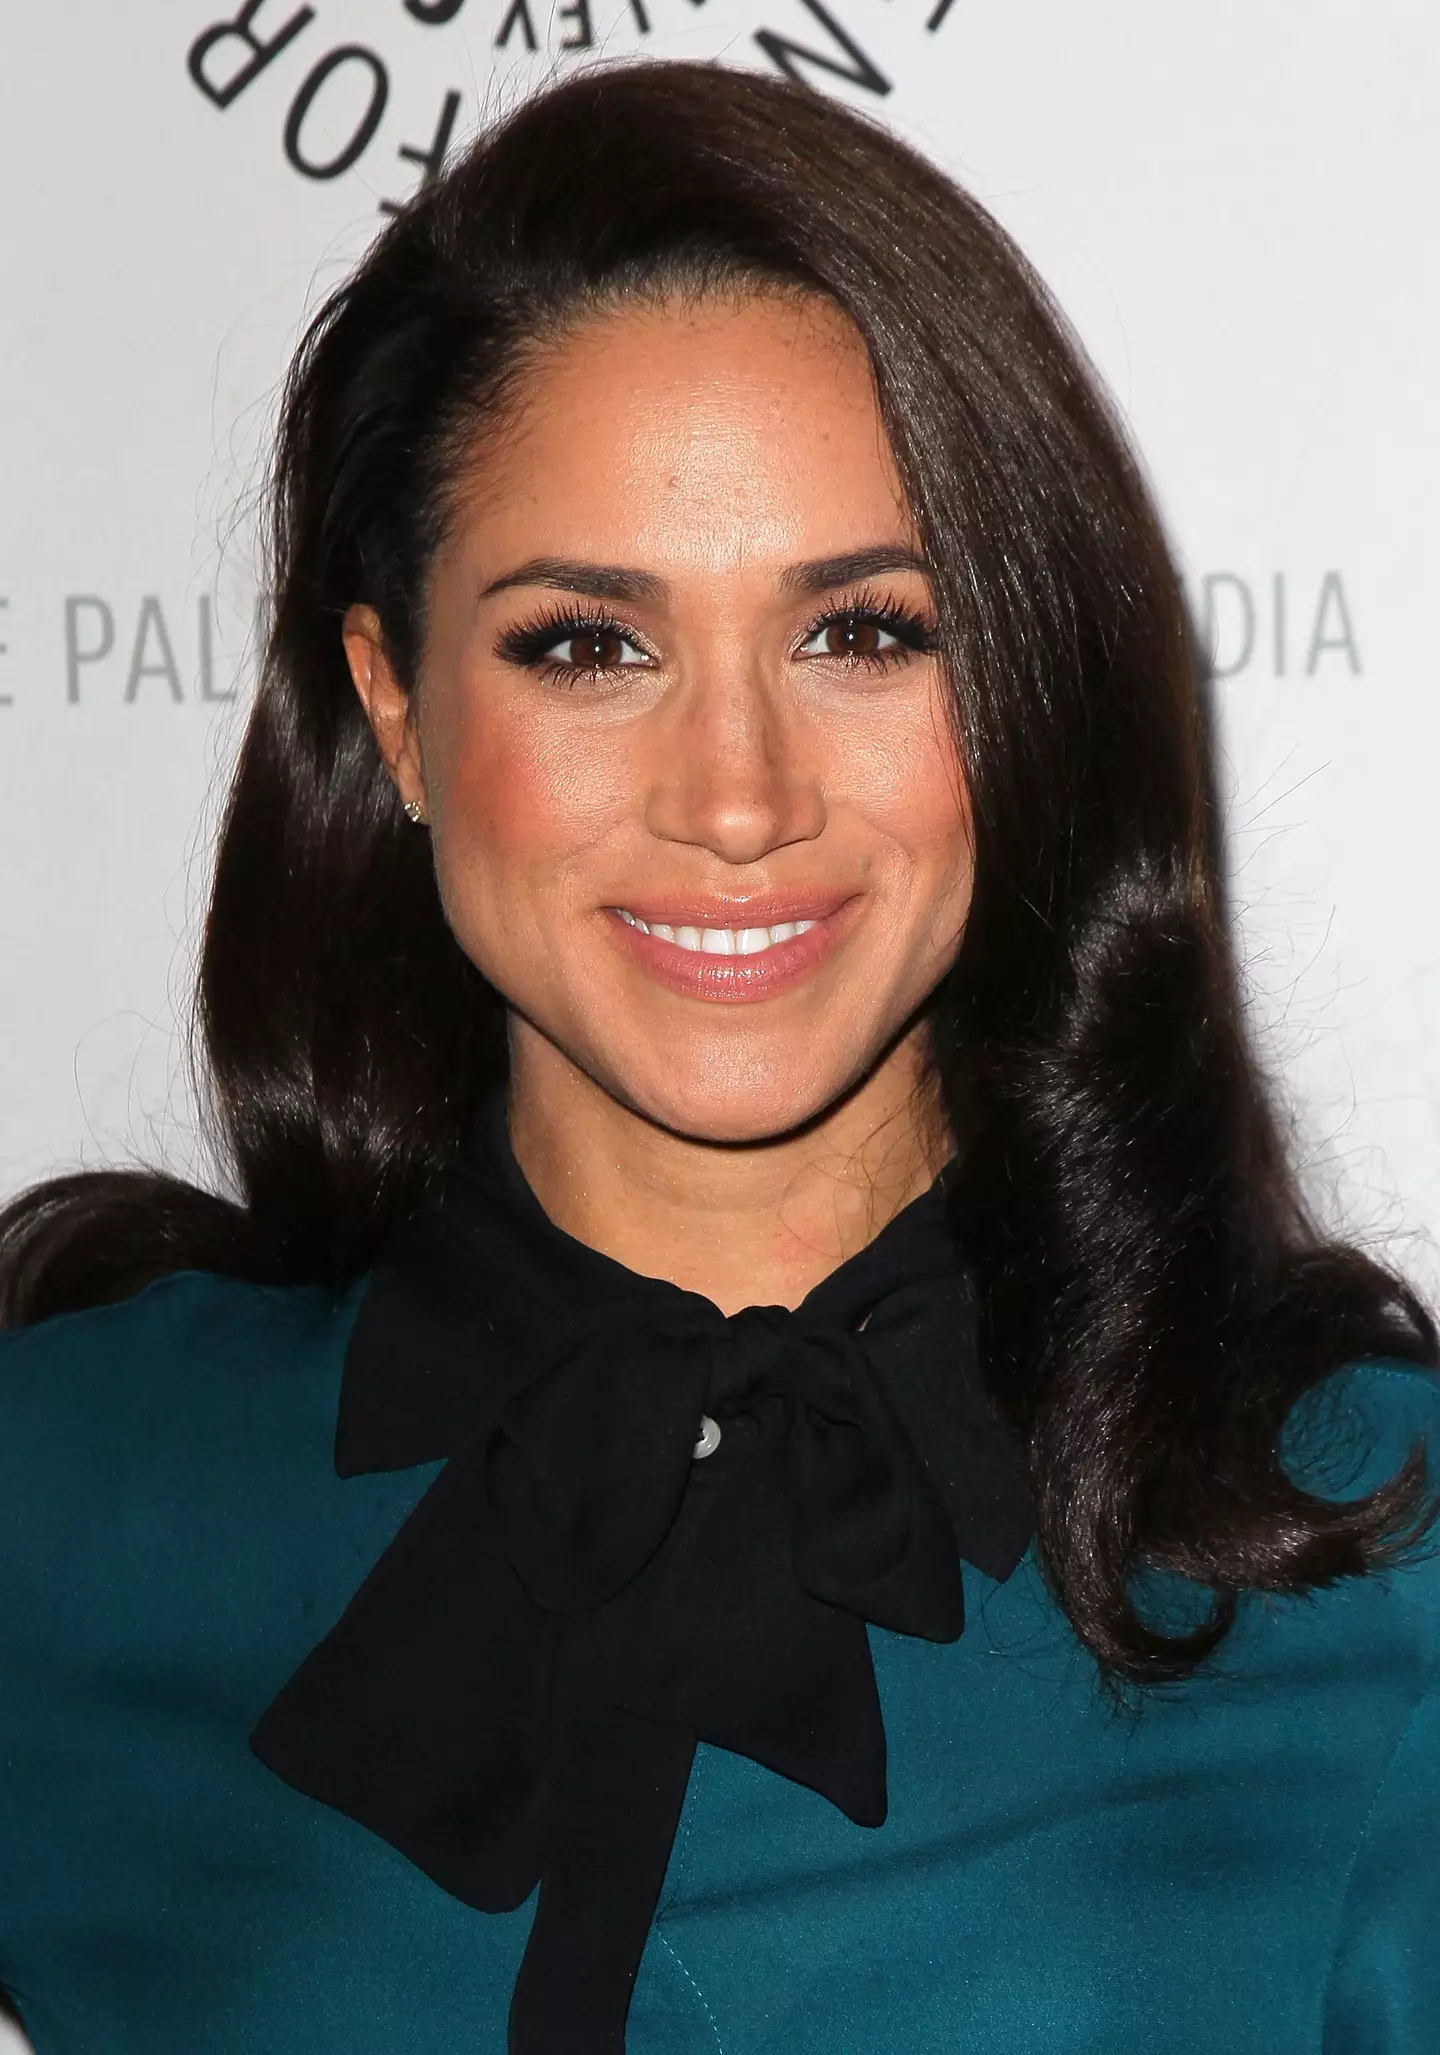 Meghan Markle left the show after her marriage to Prince Harry (David Livingston/Getty Images)